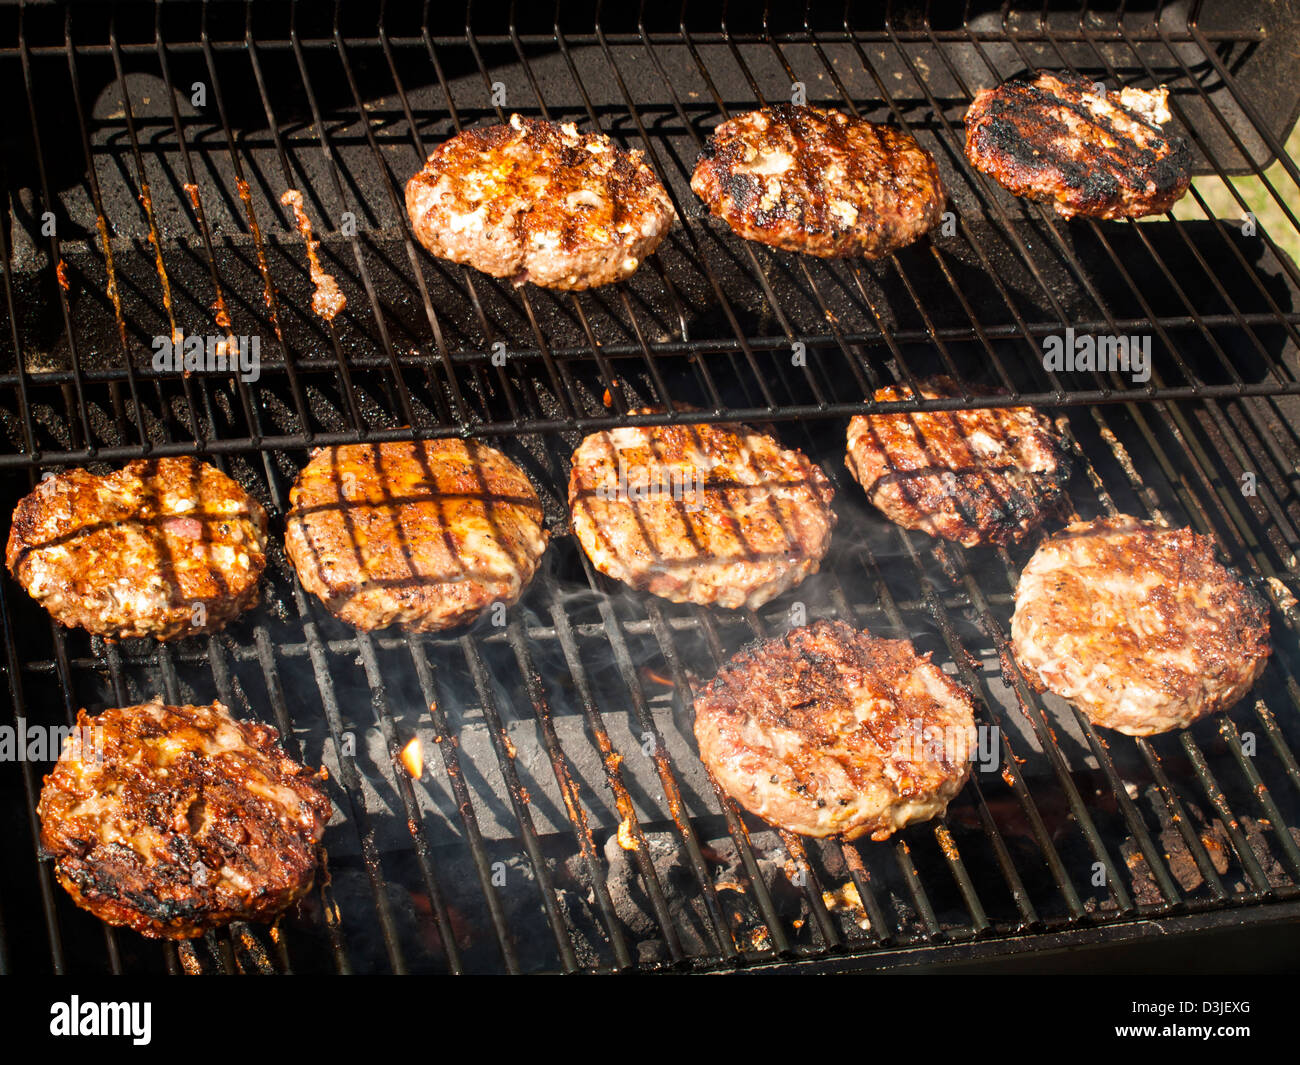 Page 8 - Fancy Grill High Resolution Stock Photography and Images - Alamy